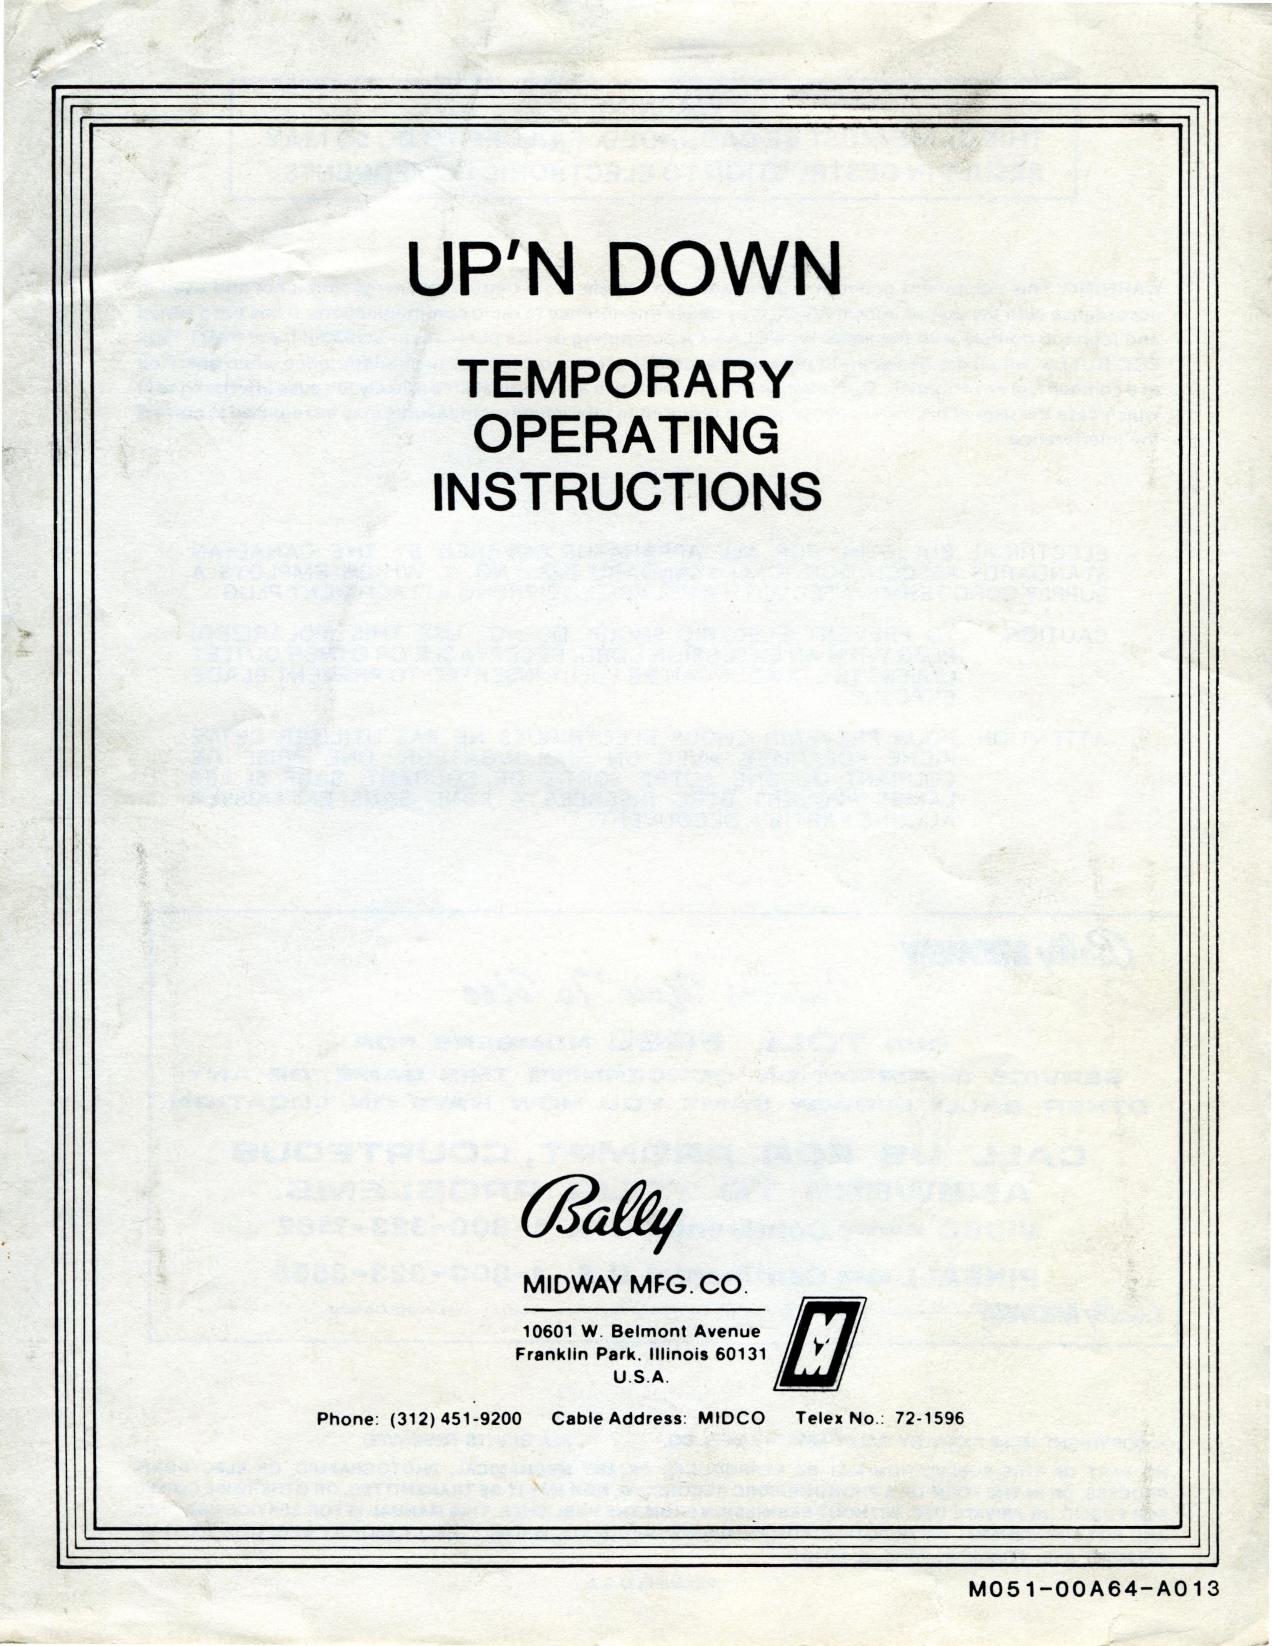 Up'N Down Temporary Operating Instructions